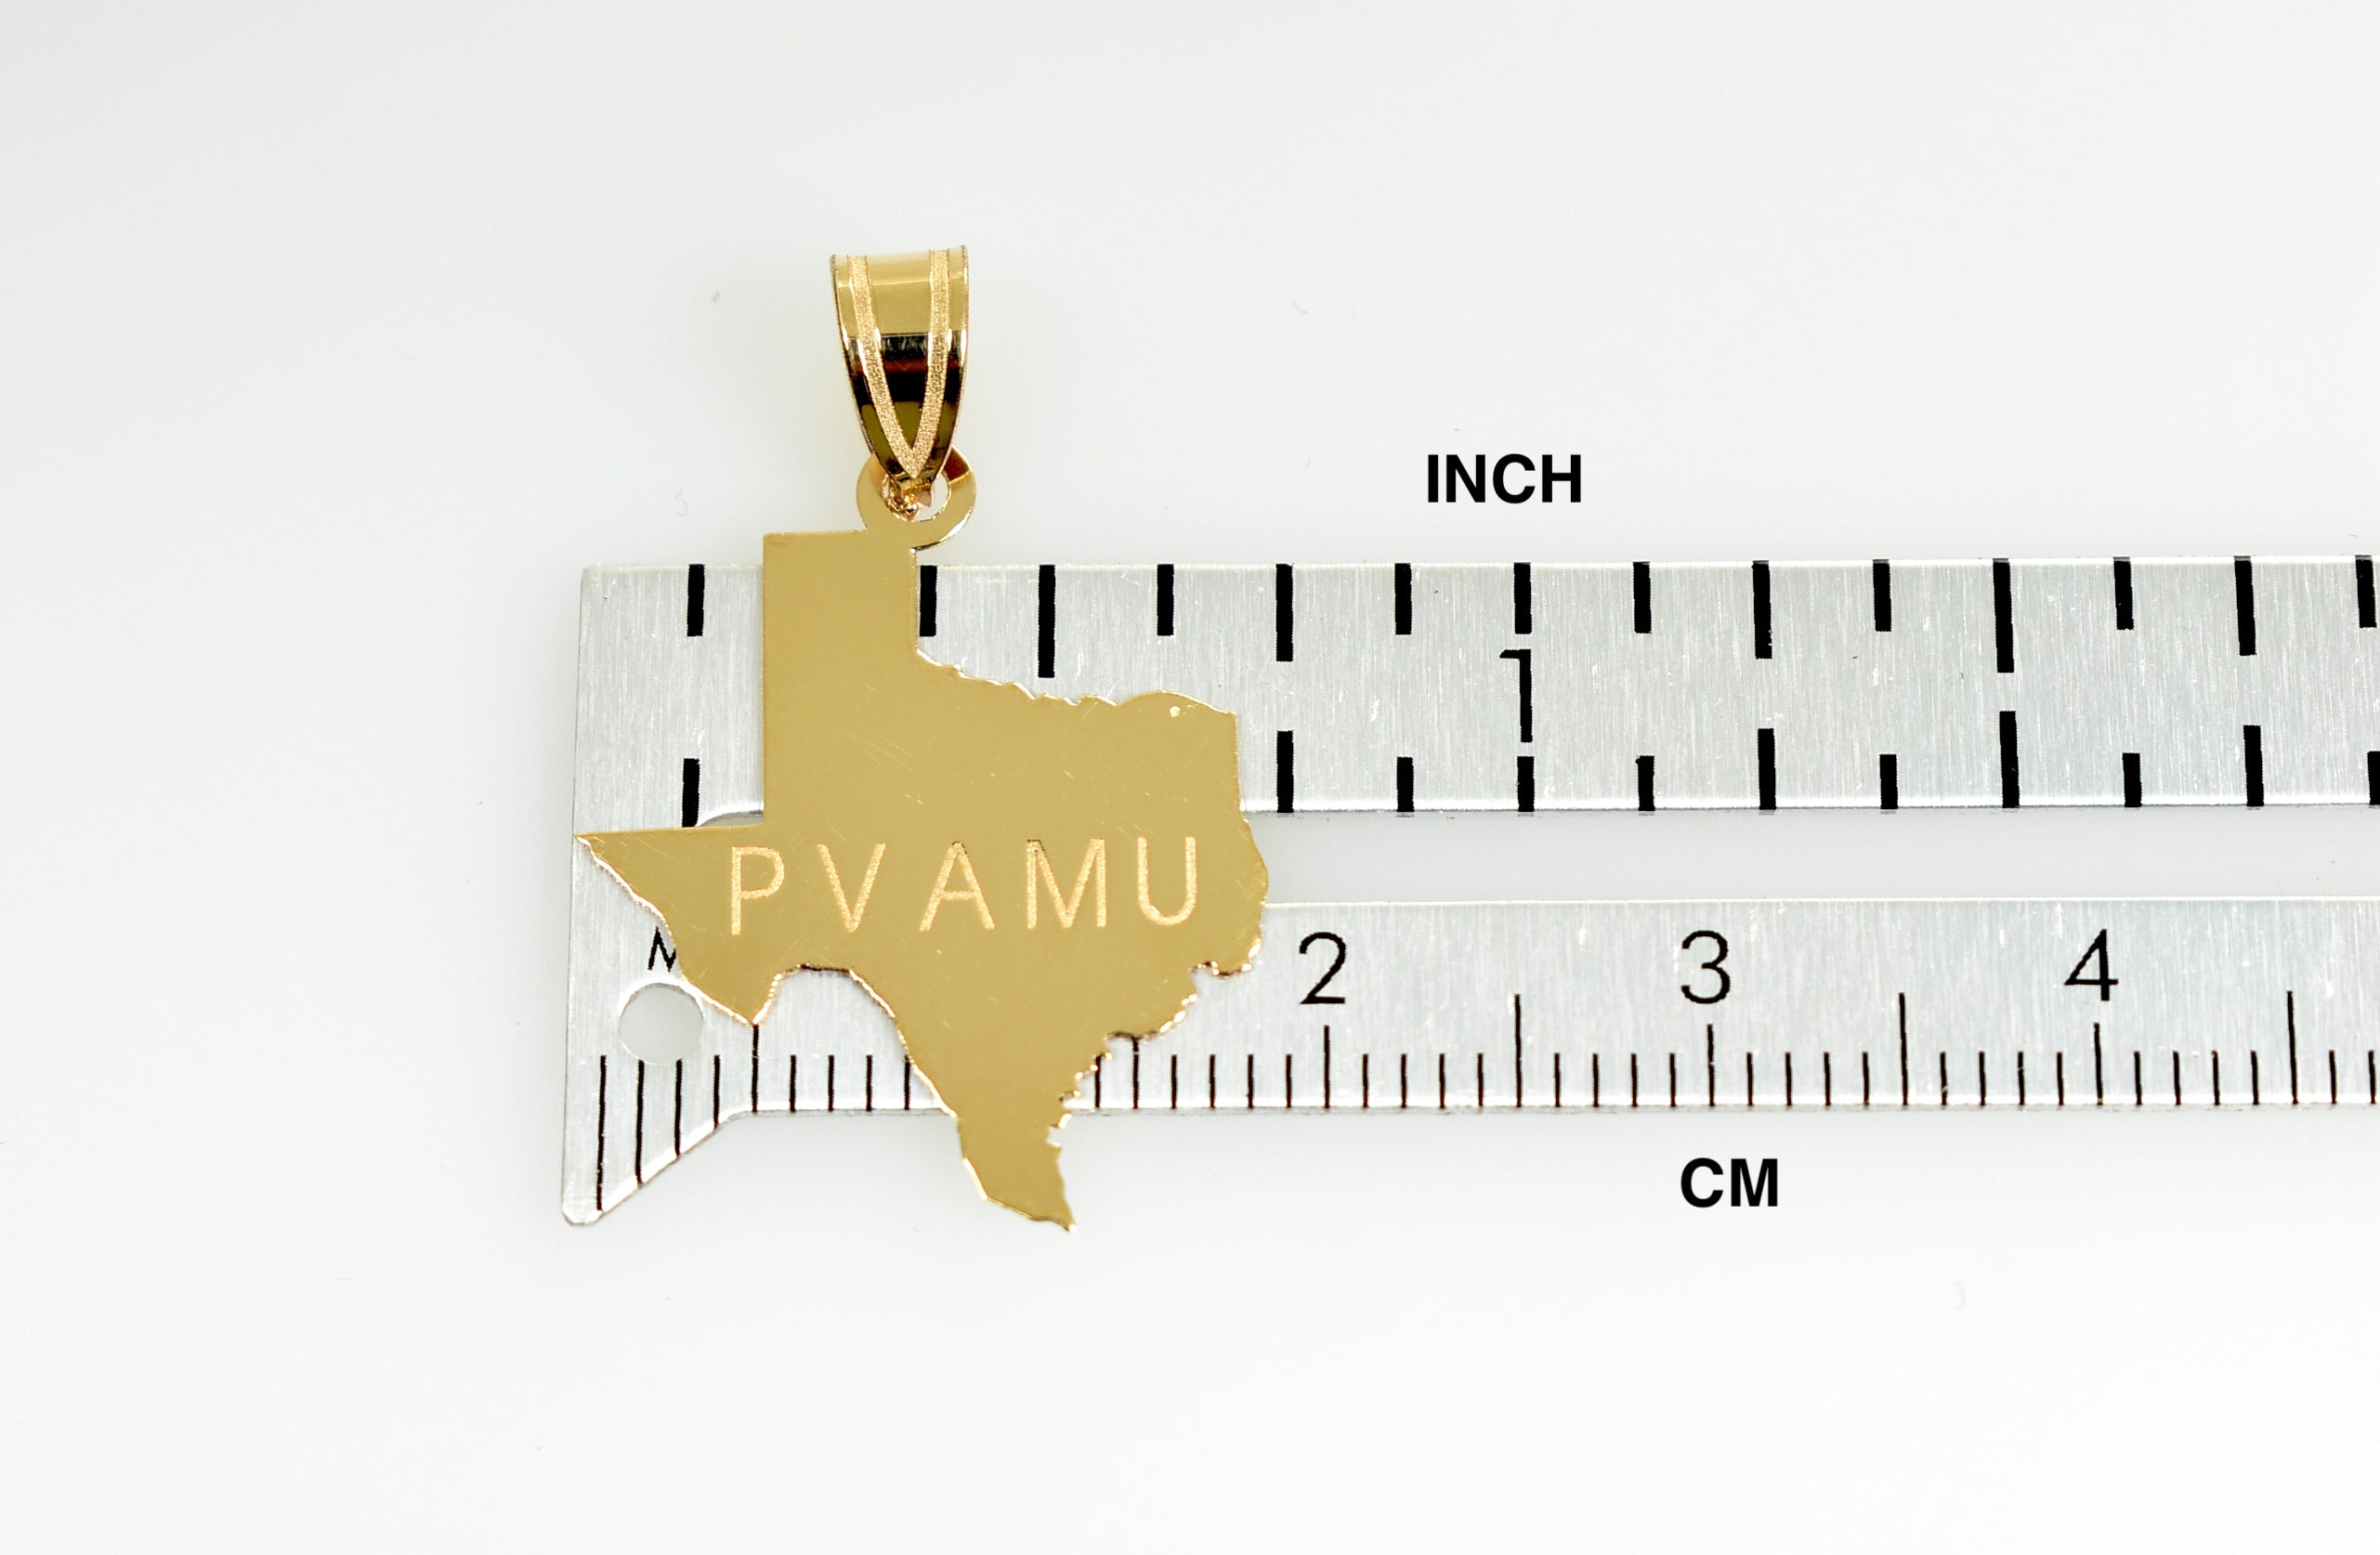 14K Gold or Sterling Silver Texas TX State Map Pendant Charm Personalized Monogram